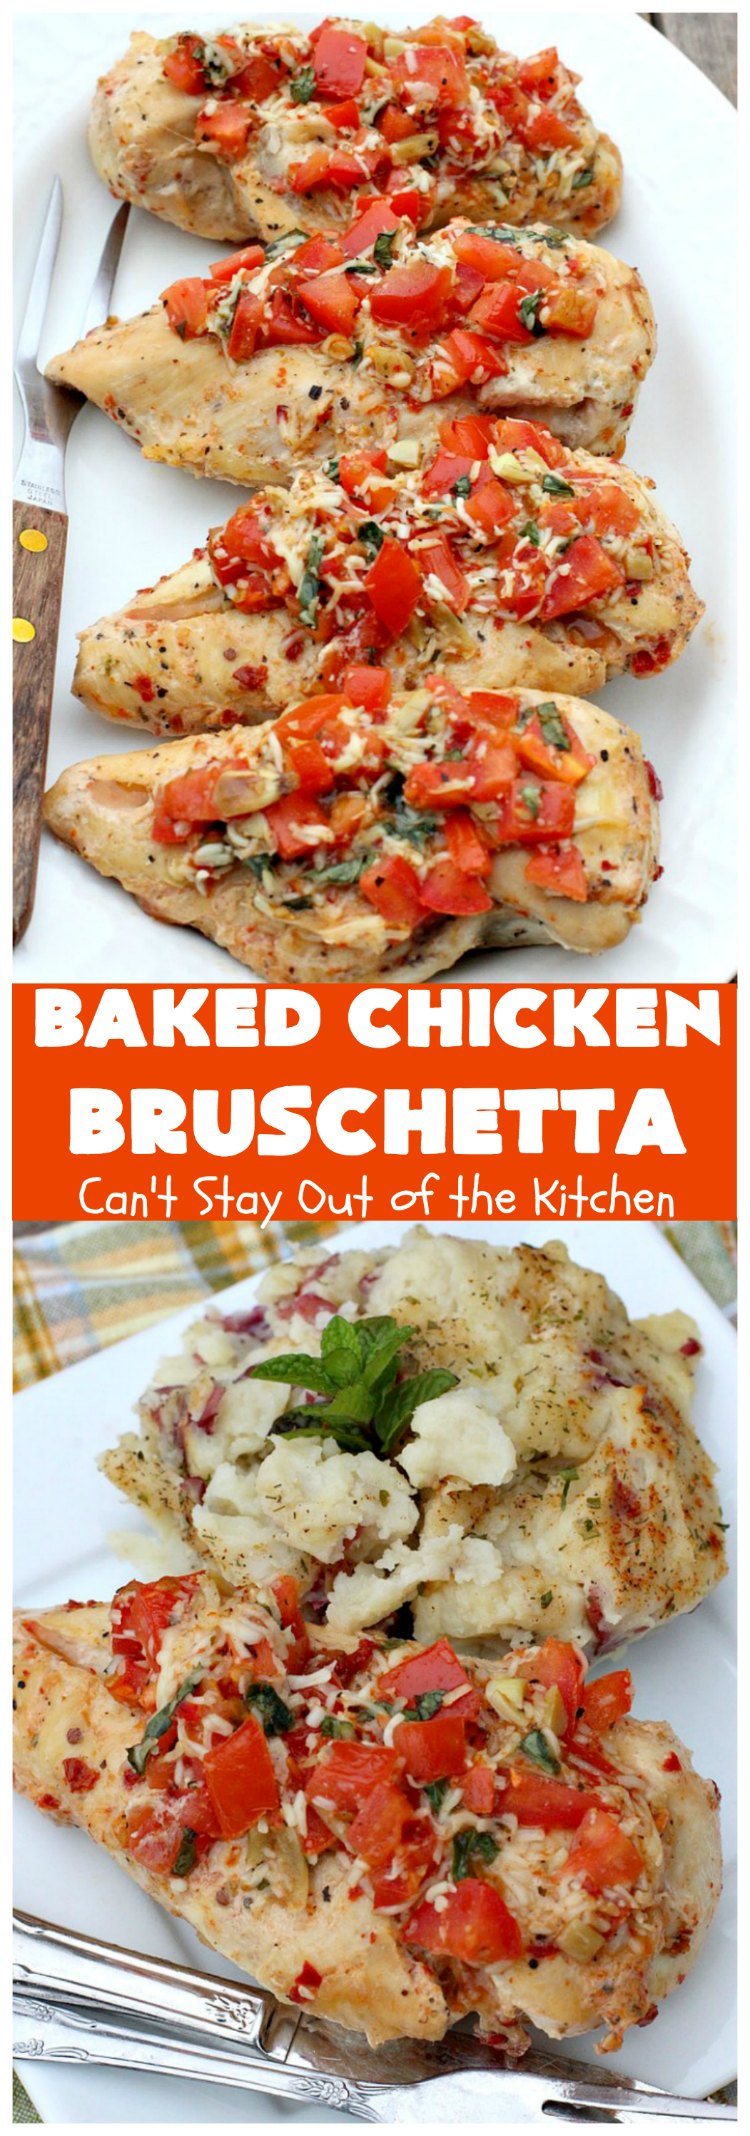 Baked Chicken Bruschetta | Can't Stay Out of the Kitchen